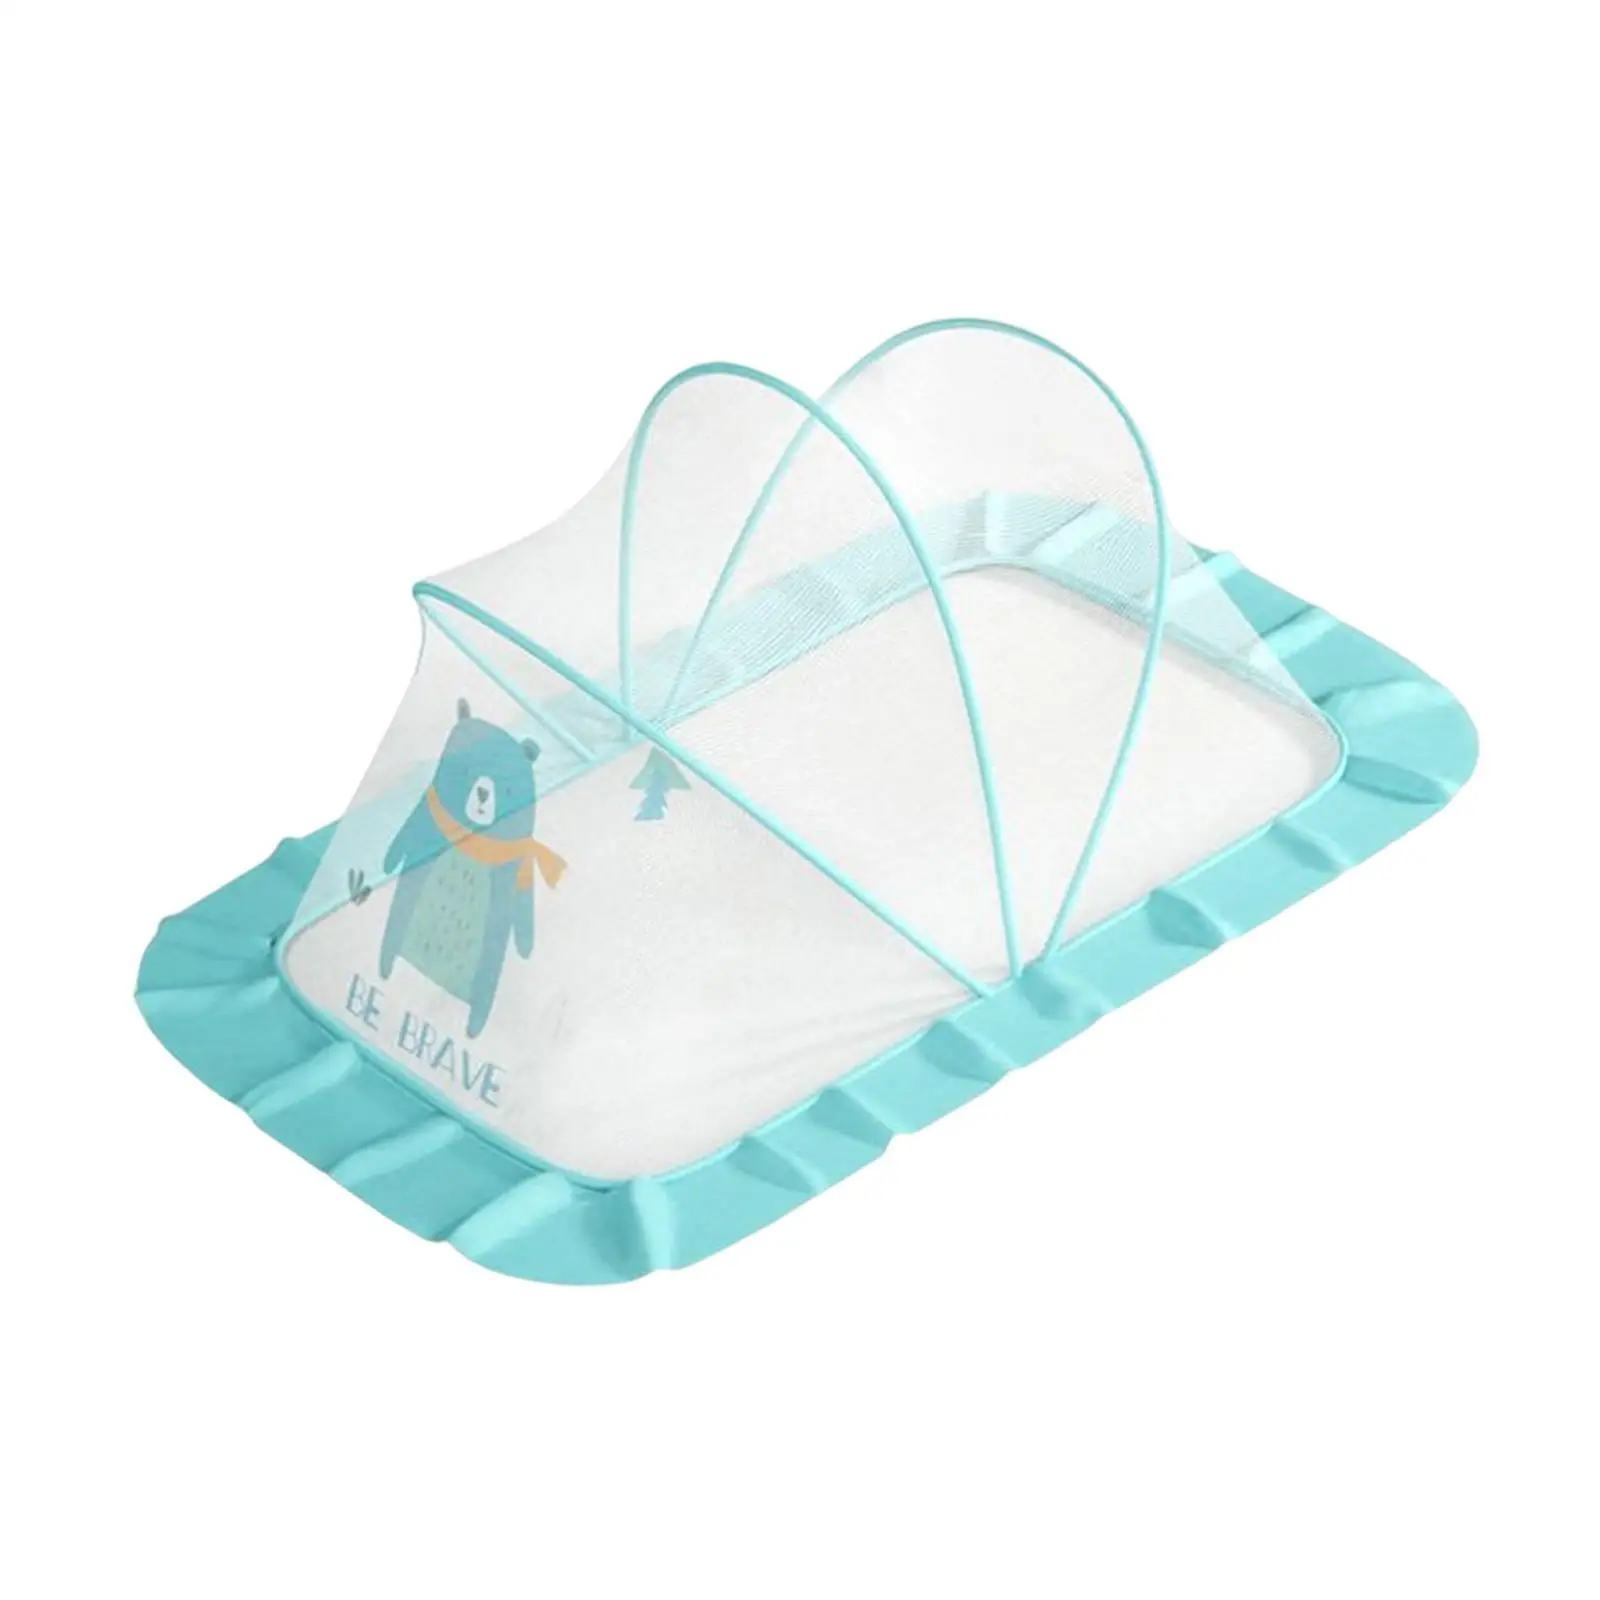 Portable Baby Cots Net Lightweight High Density Grids Foldable for Crawling Mats